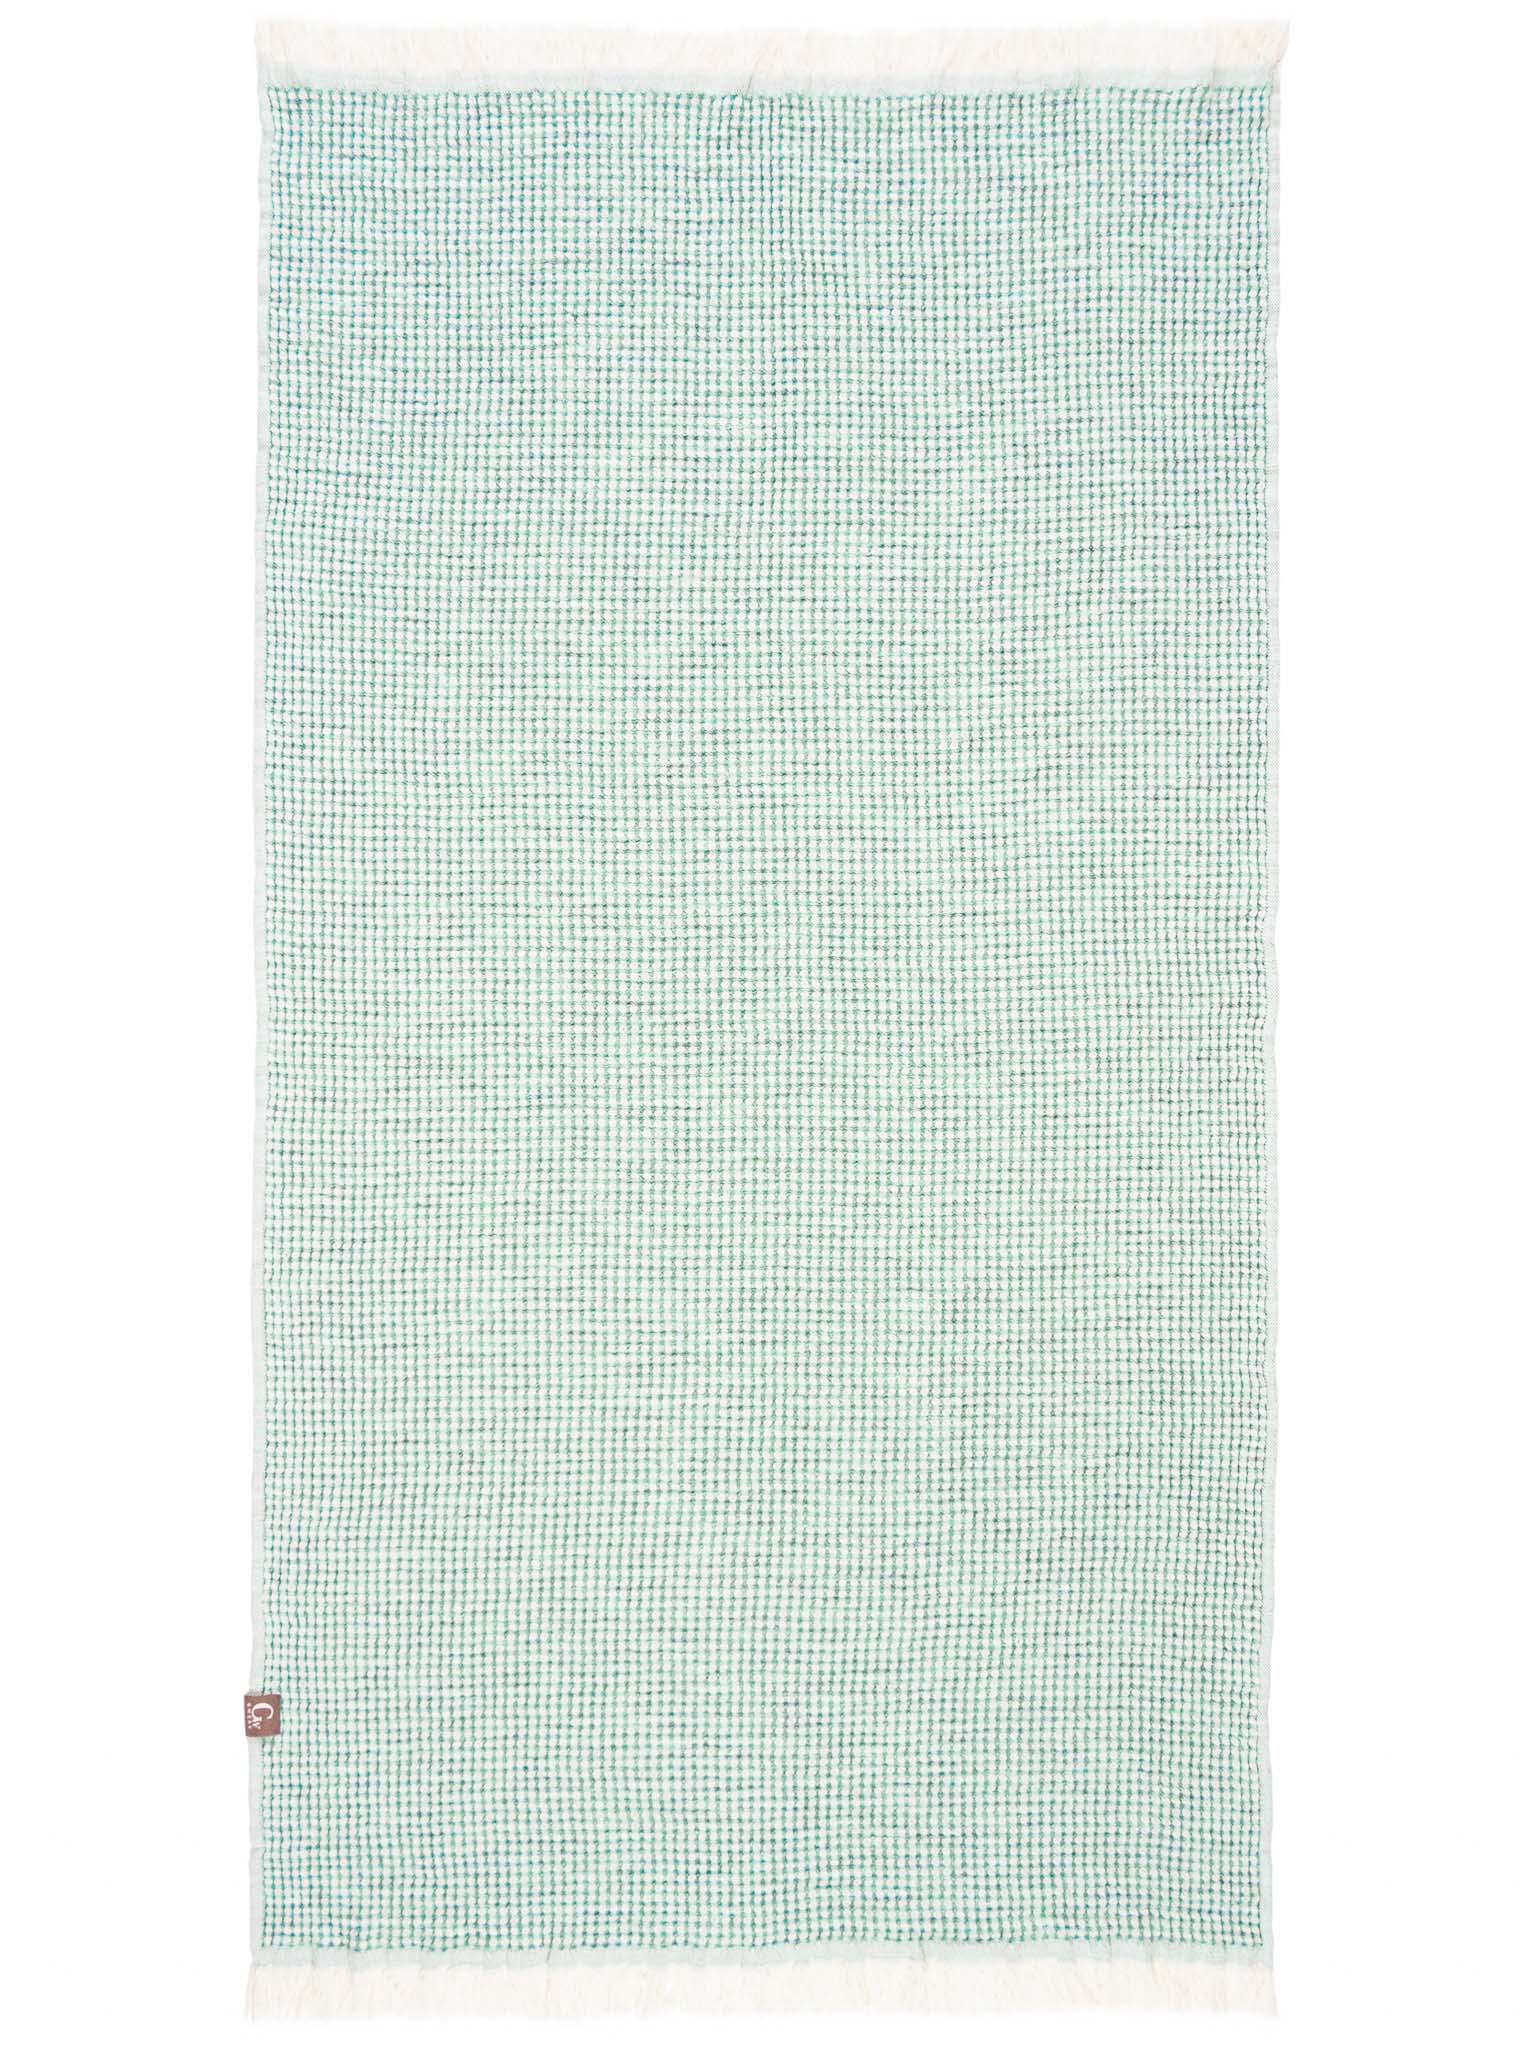 Green patterned double sided, honeycomb beach towel open up